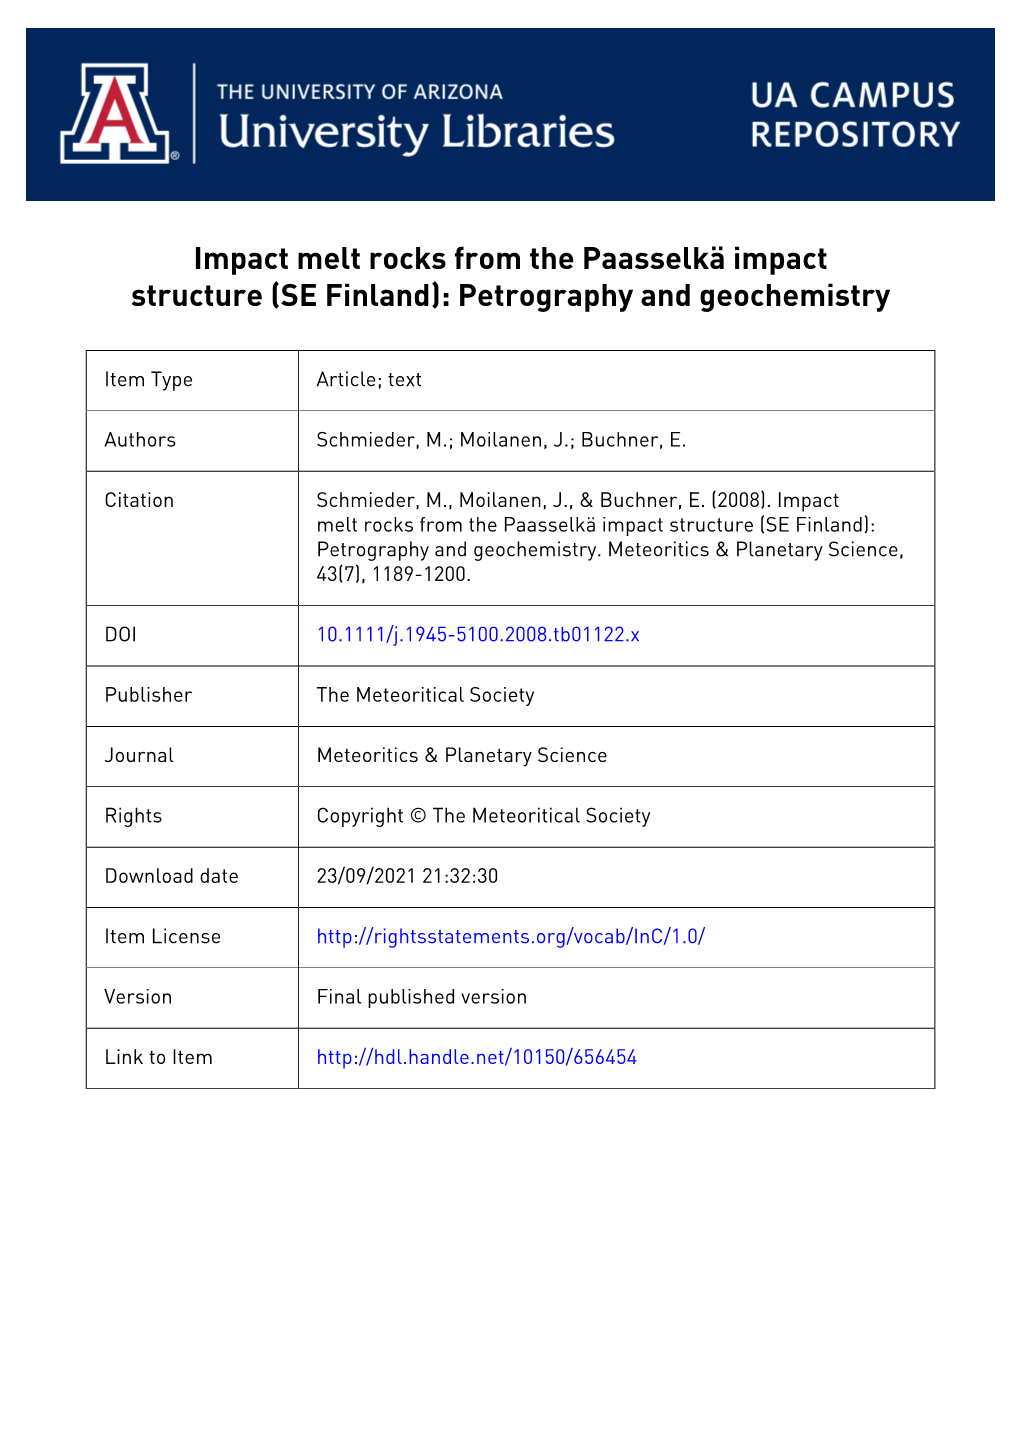 Impact Melt Rocks from the Paasselkä Impact Structure (SE Finland): Petrography and Geochemistry